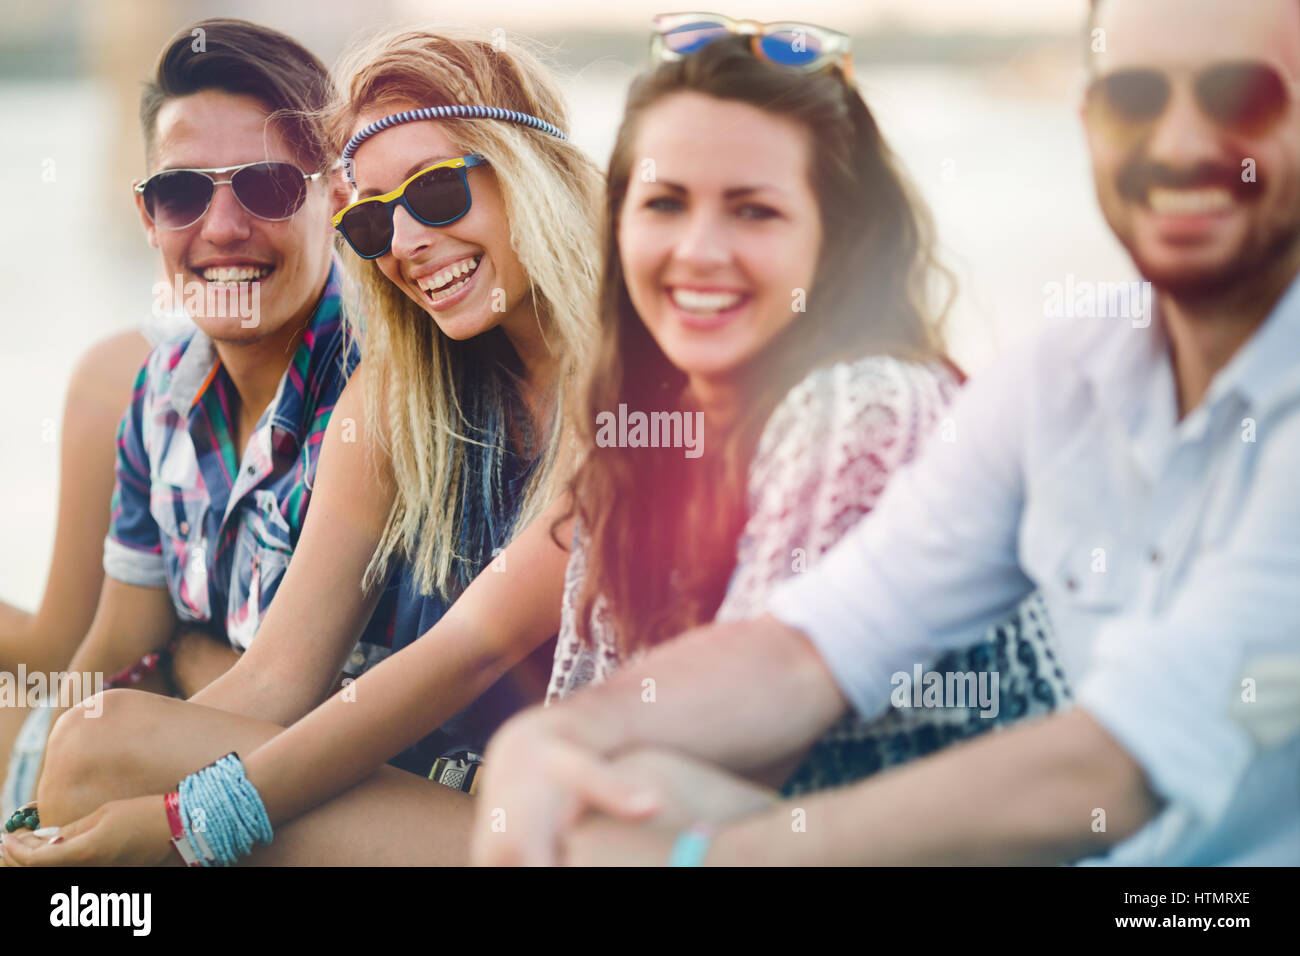 Happy group of young people having fun and enjoying festival in summer Stock Photo